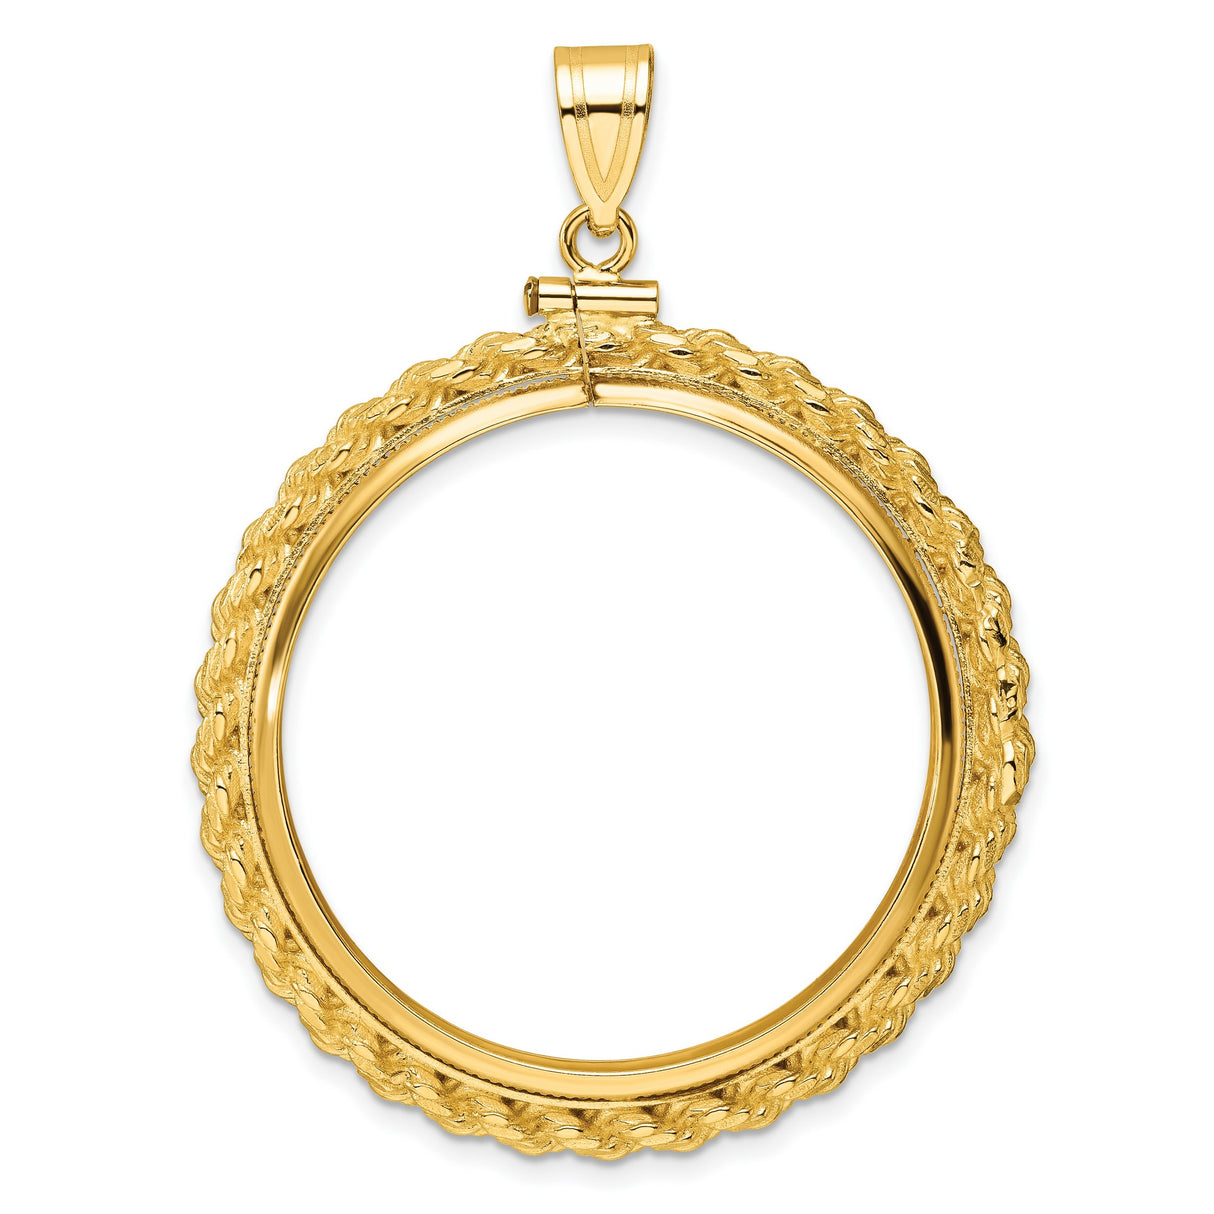 1 oz Krugerrand Screw Top Polished Rope Coin Bezel in 14k Yellow Gold